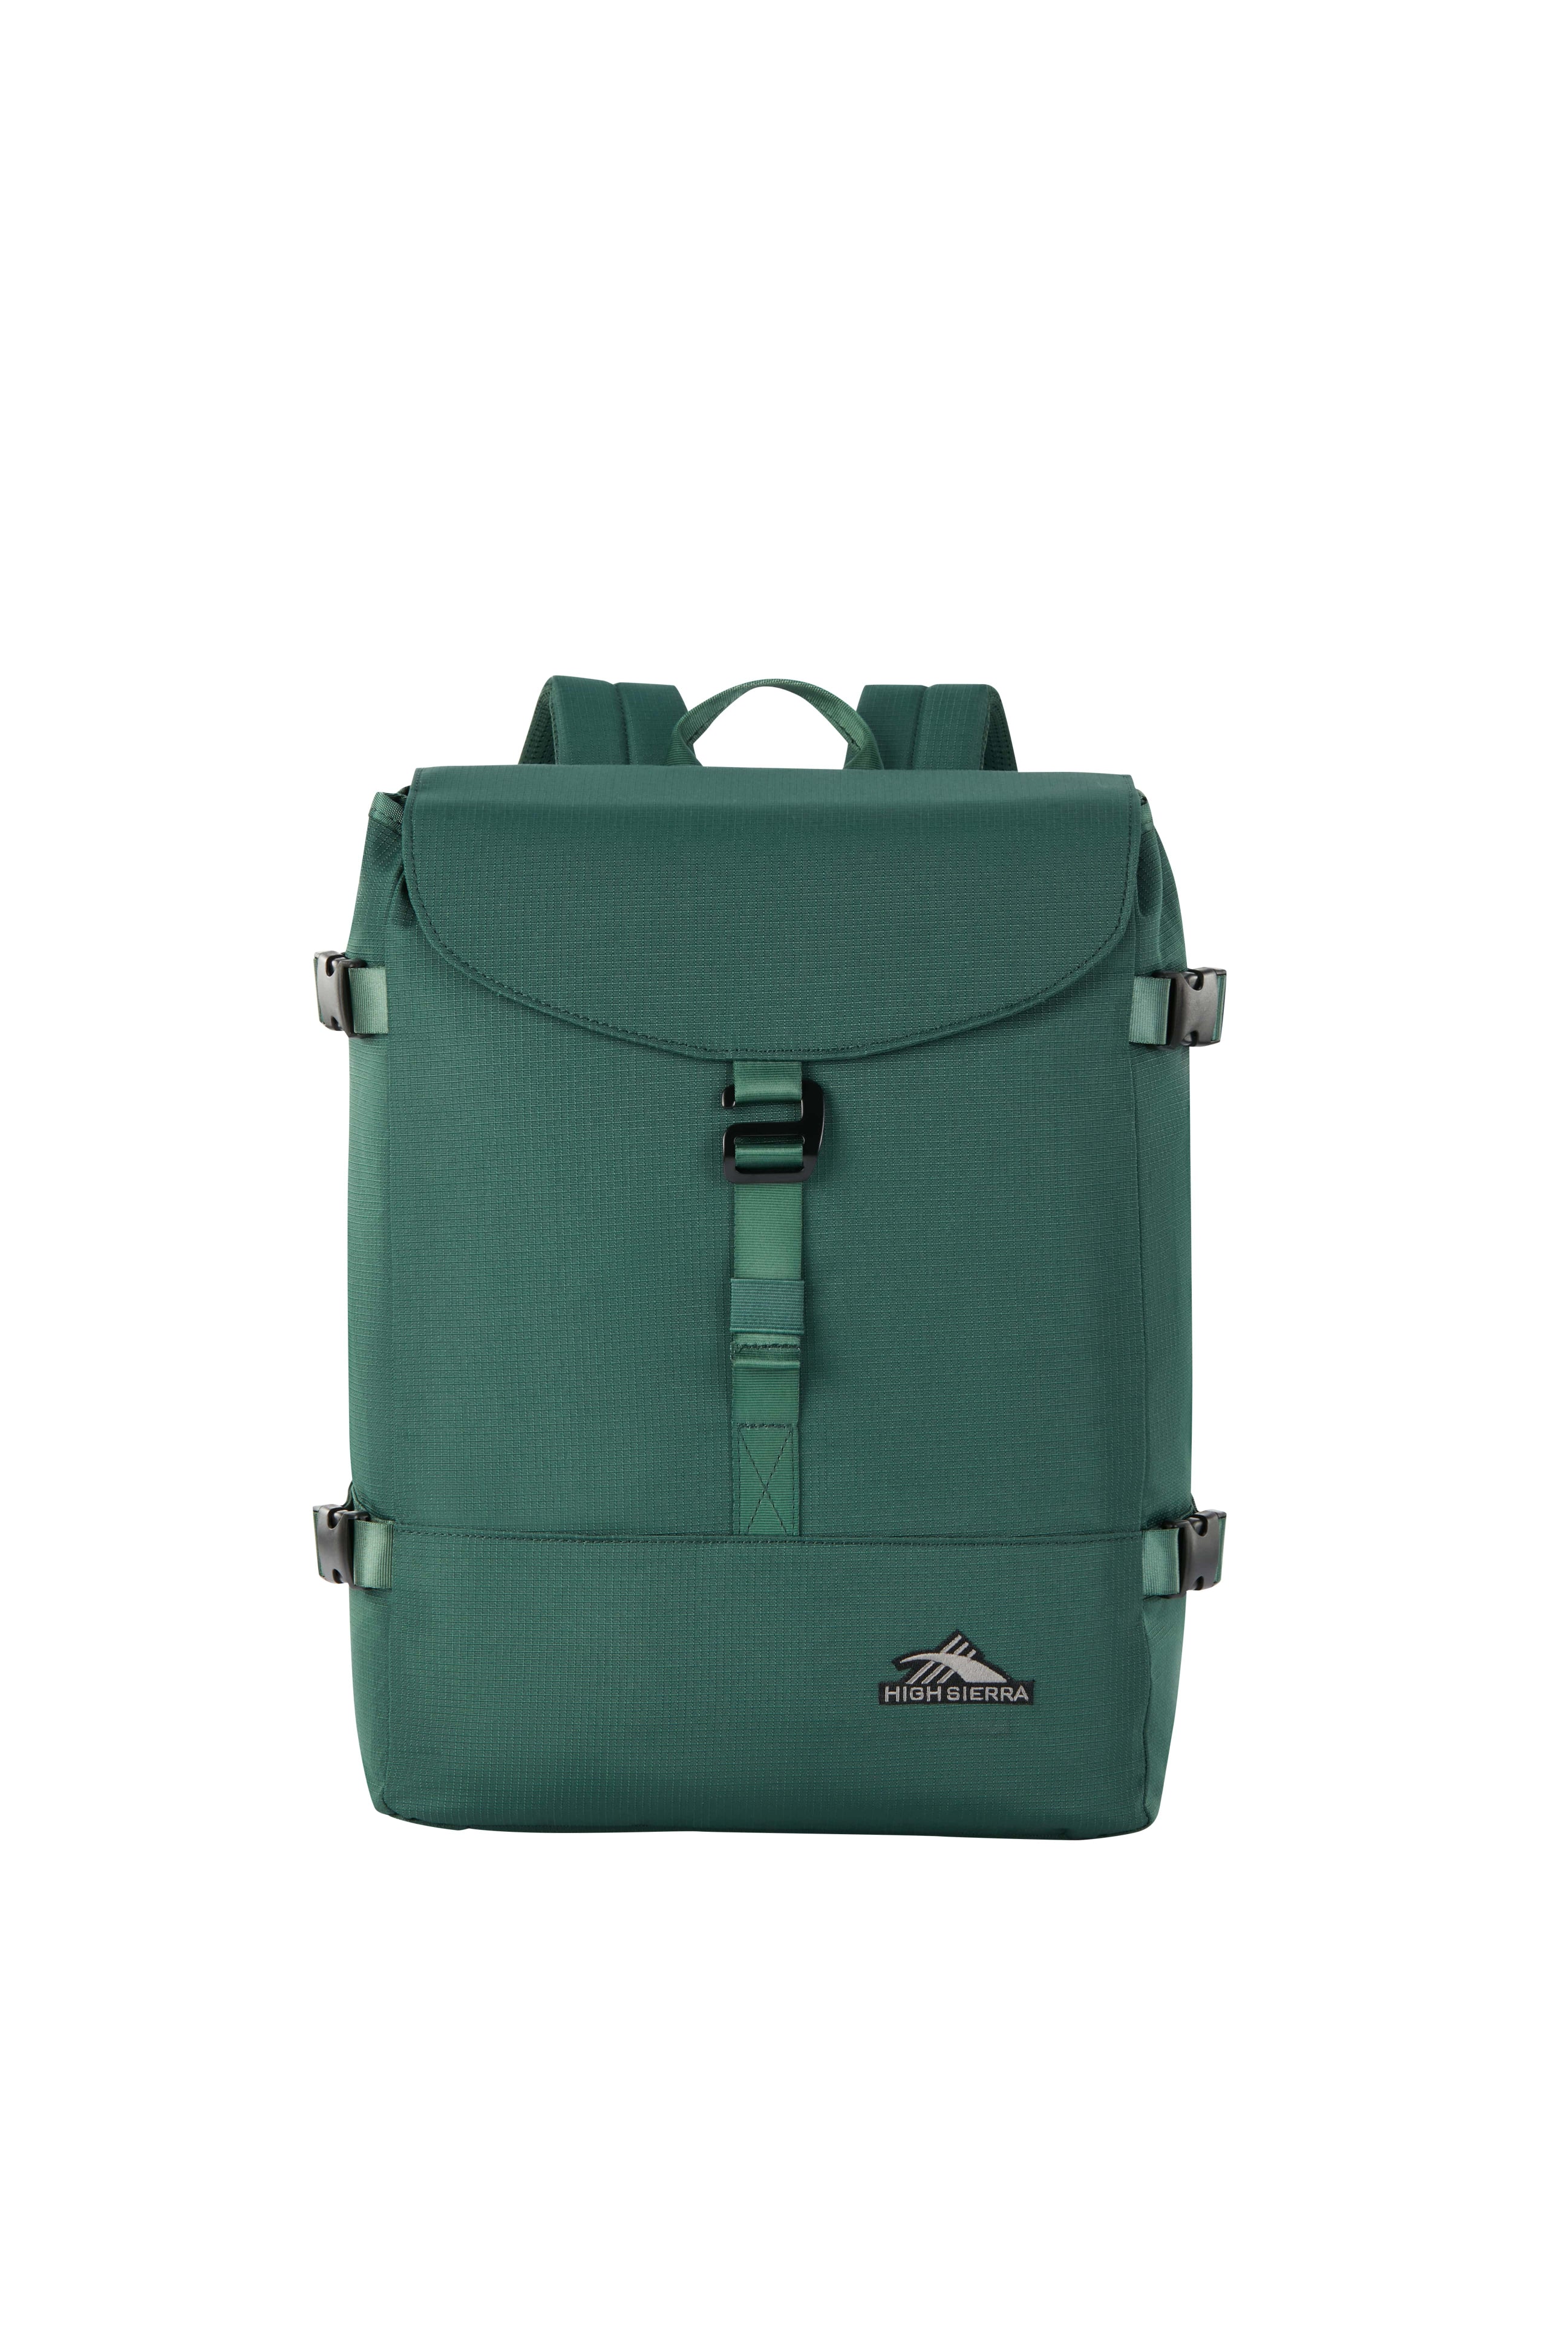 High Sierra - Camille 20L 15.6in Laptop backpack - Green